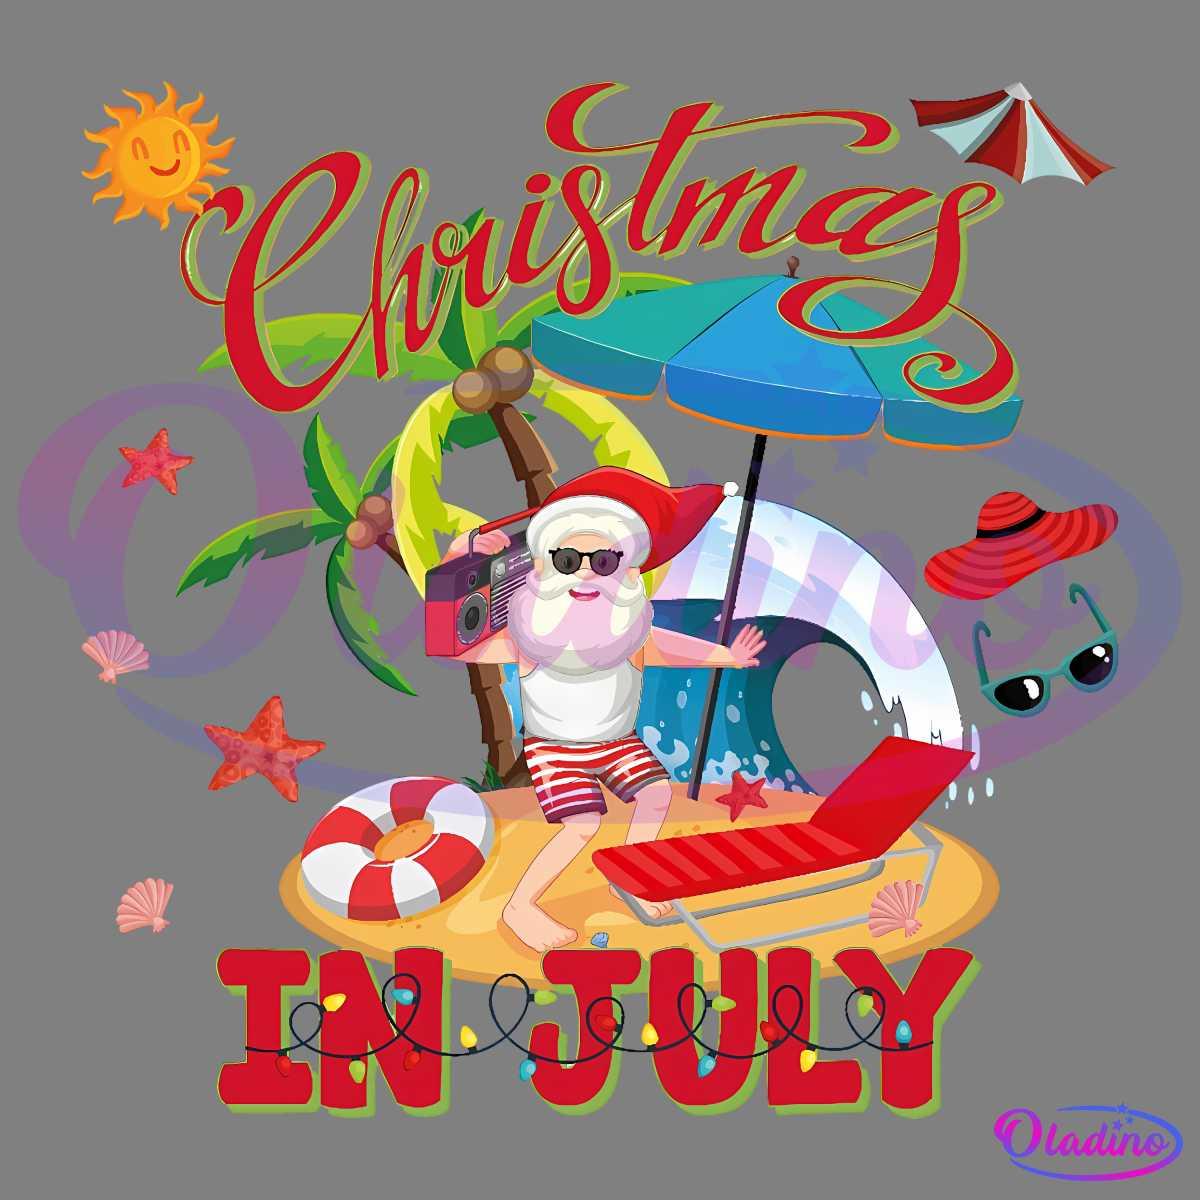 Illustration of Santa Claus relaxing on a beach under an umbrella, holding a boombox. Elements include a surfboard, palm trees, an inflatable ring, seashells, a beach chair, and the text "Christmas in July" in colorful, festive fonts.